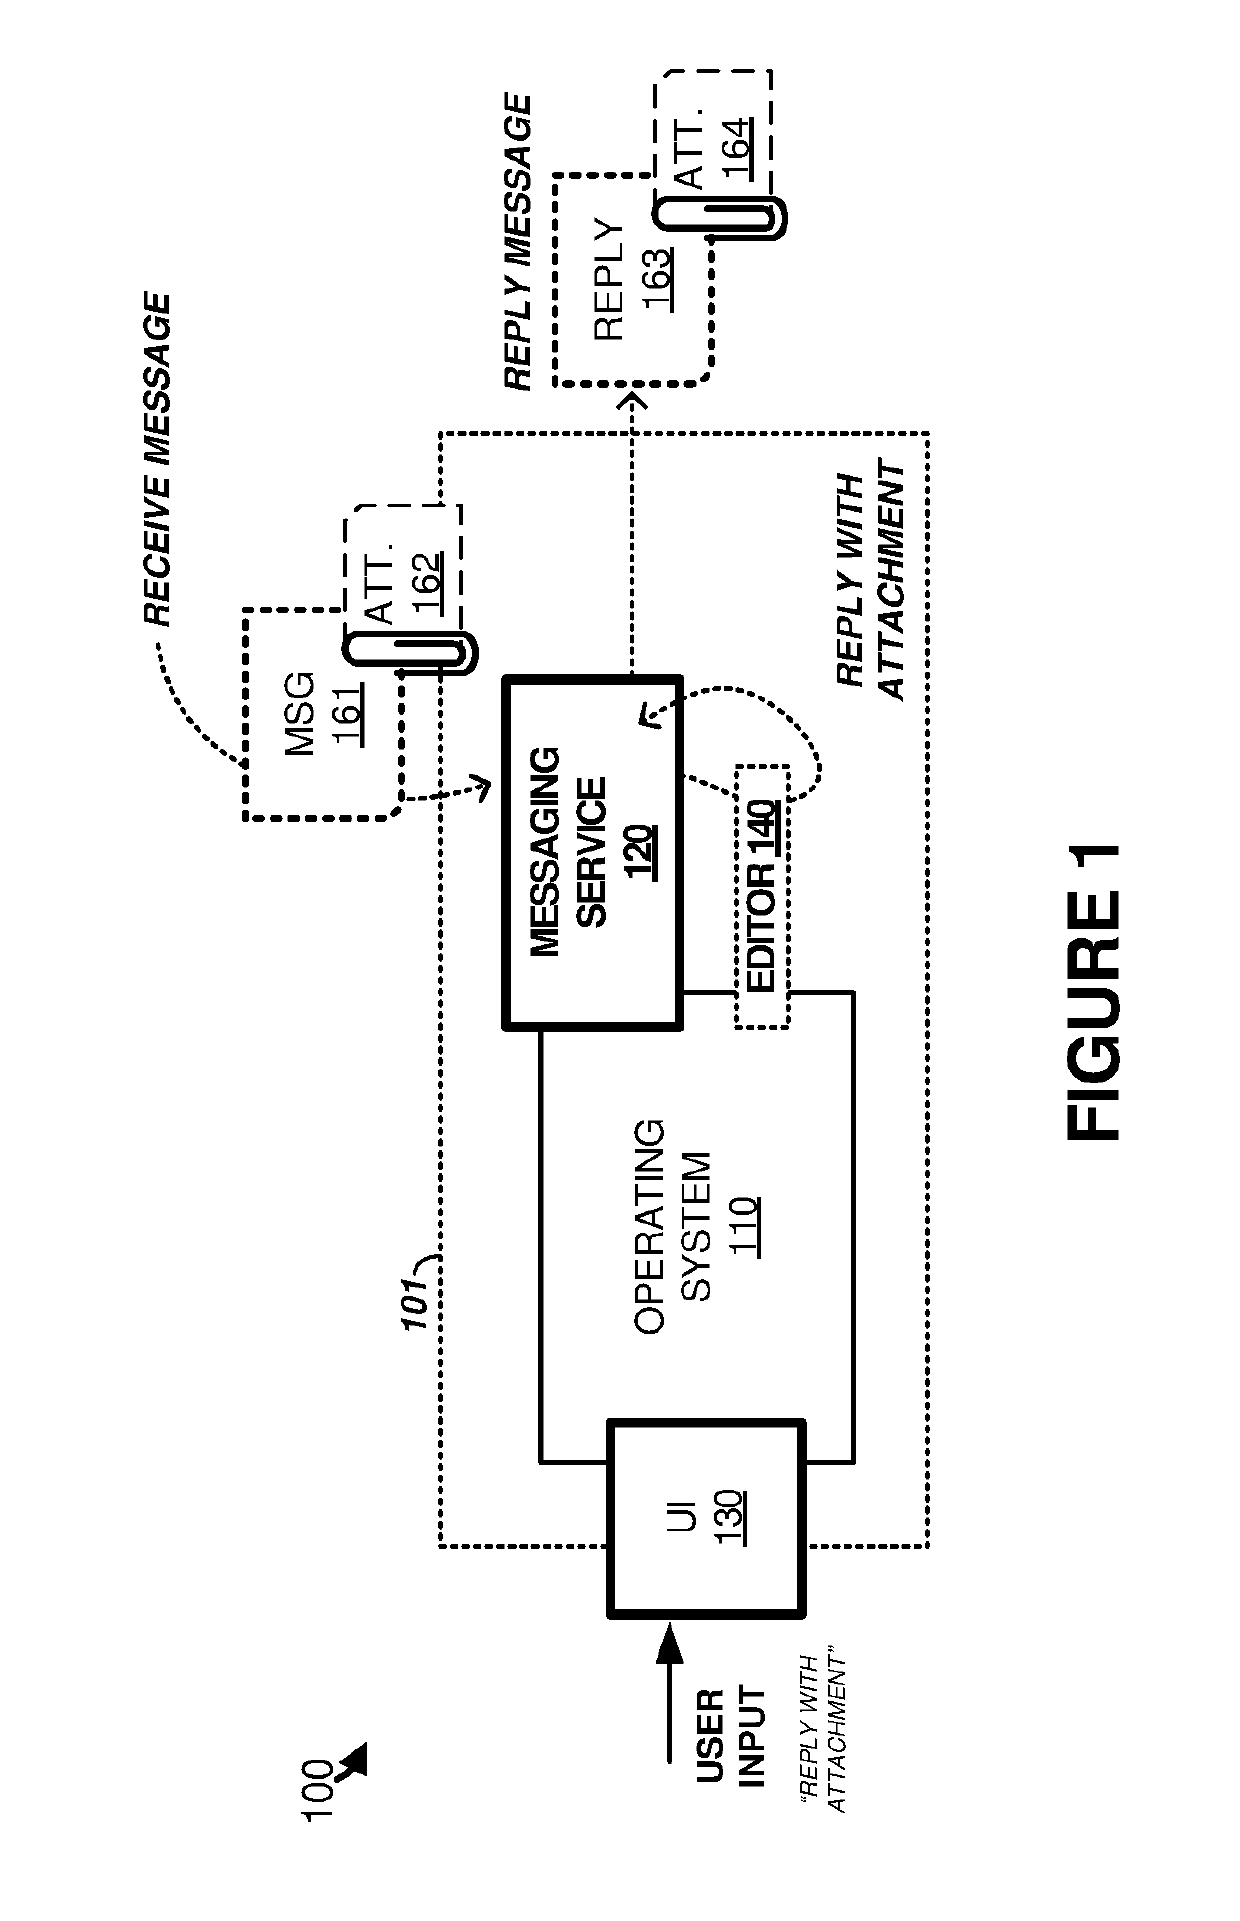 Attachment reply handling in networked messaging systems